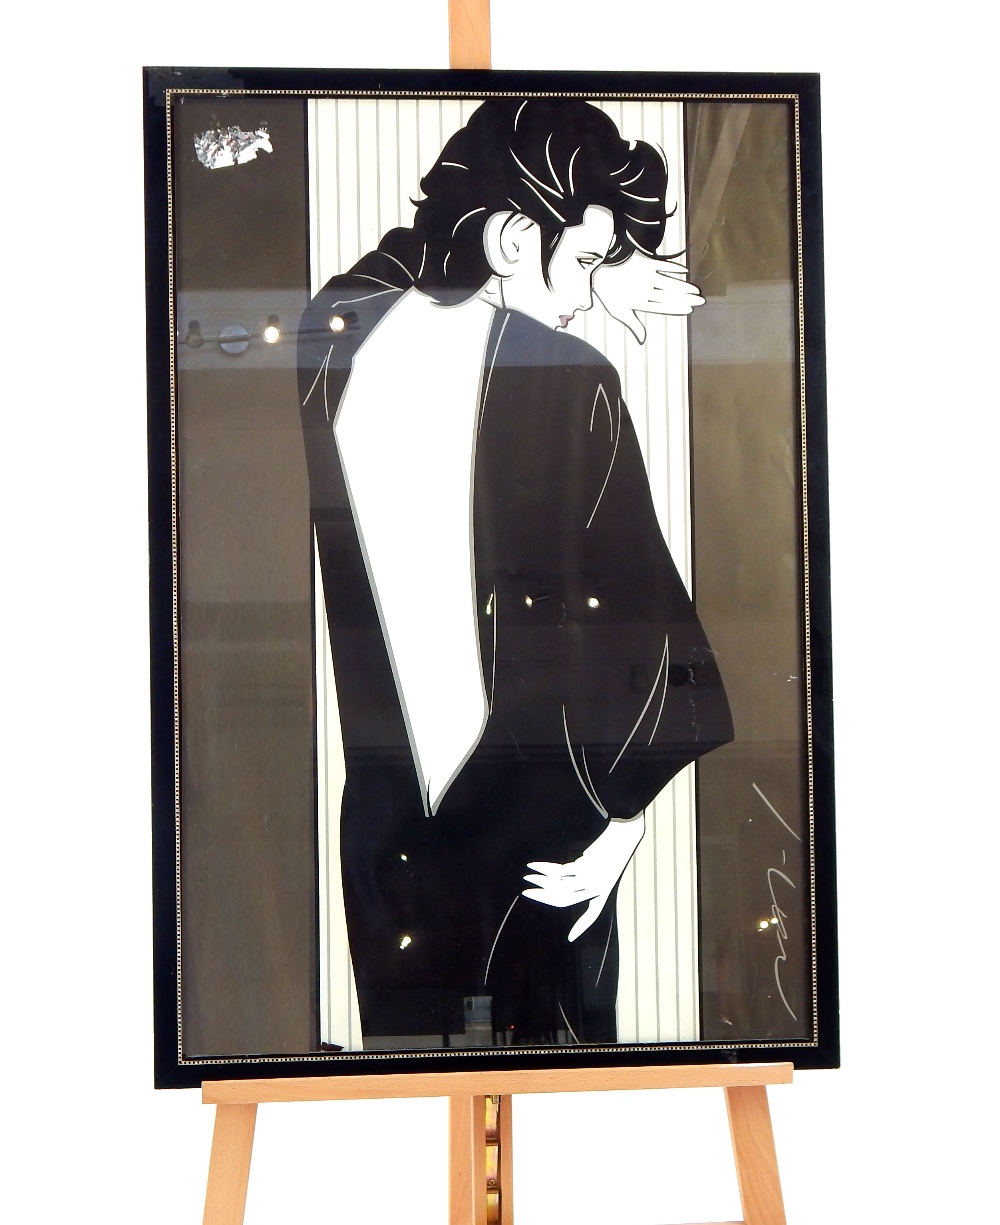 A mid 20th century print after Haute Couture, depicting a lady standing in a black dress, with her